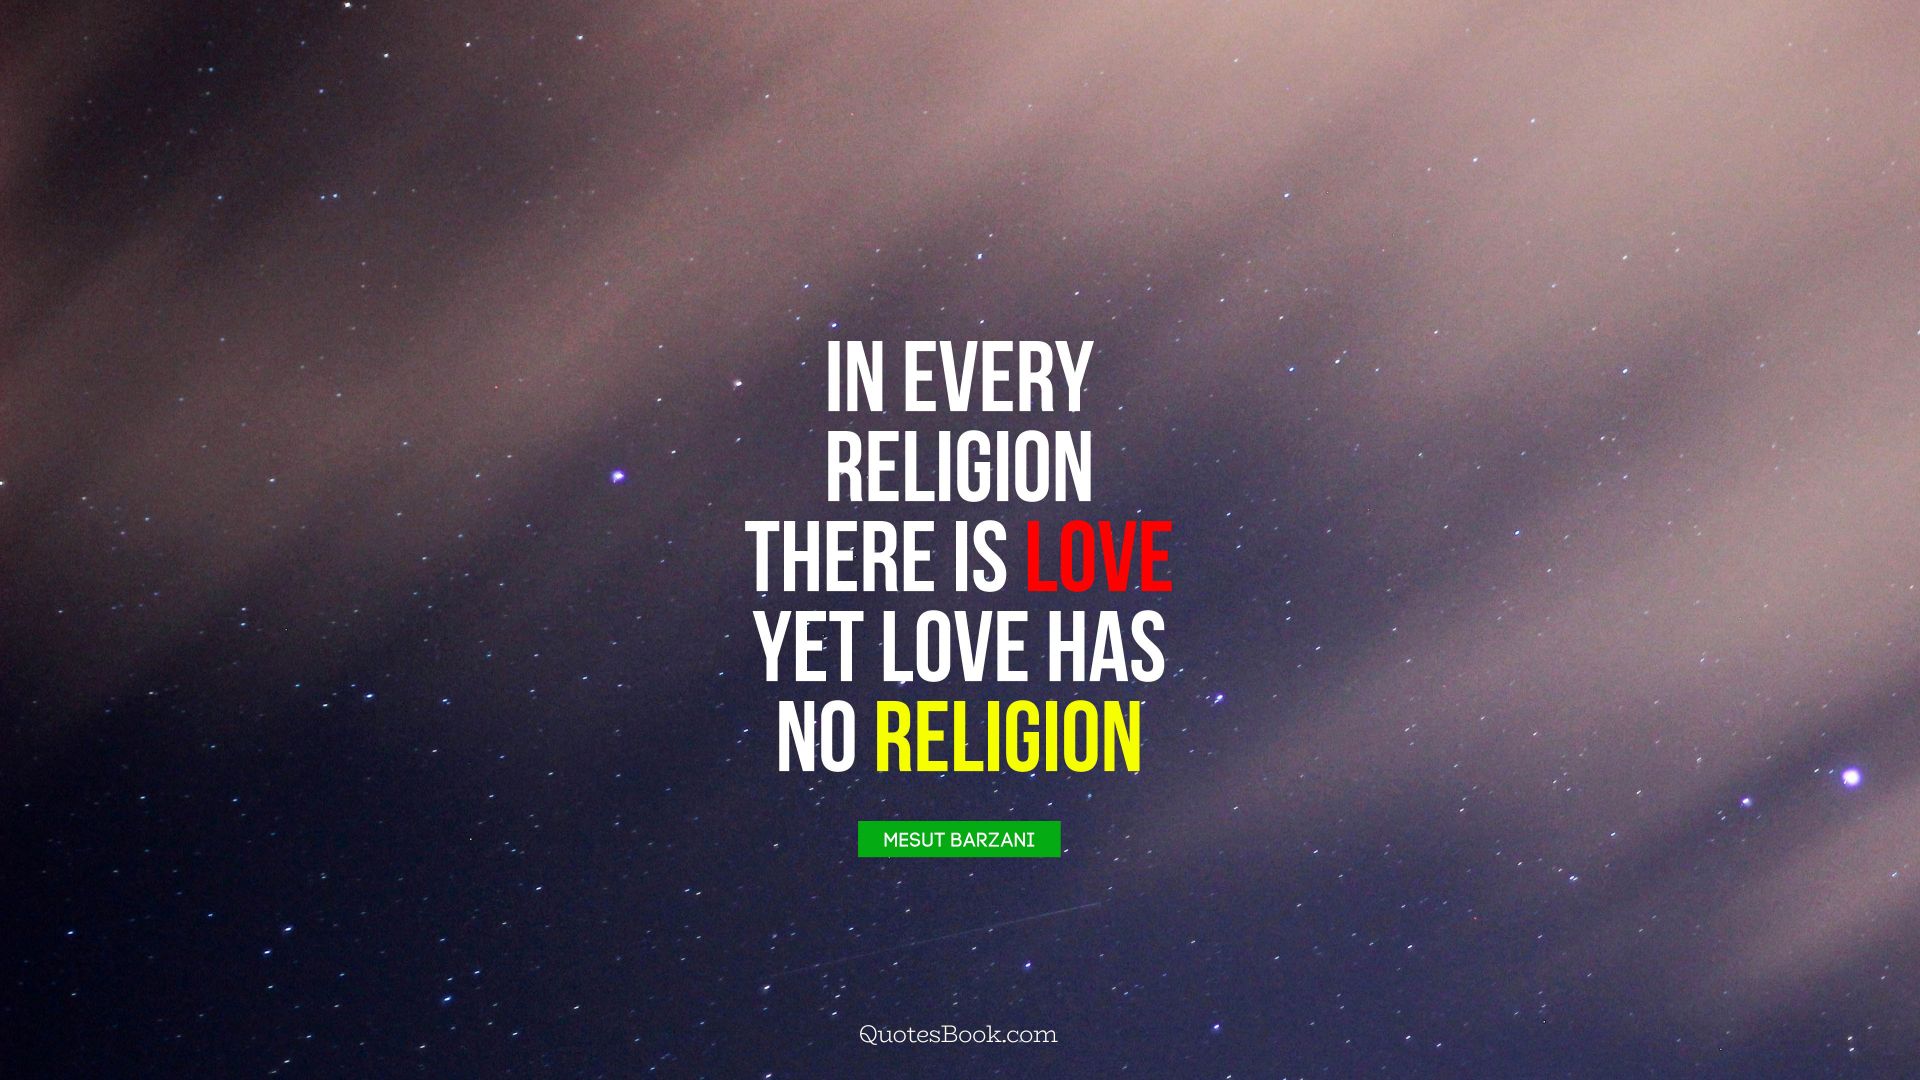 In Every religion there is love yet love has no religion